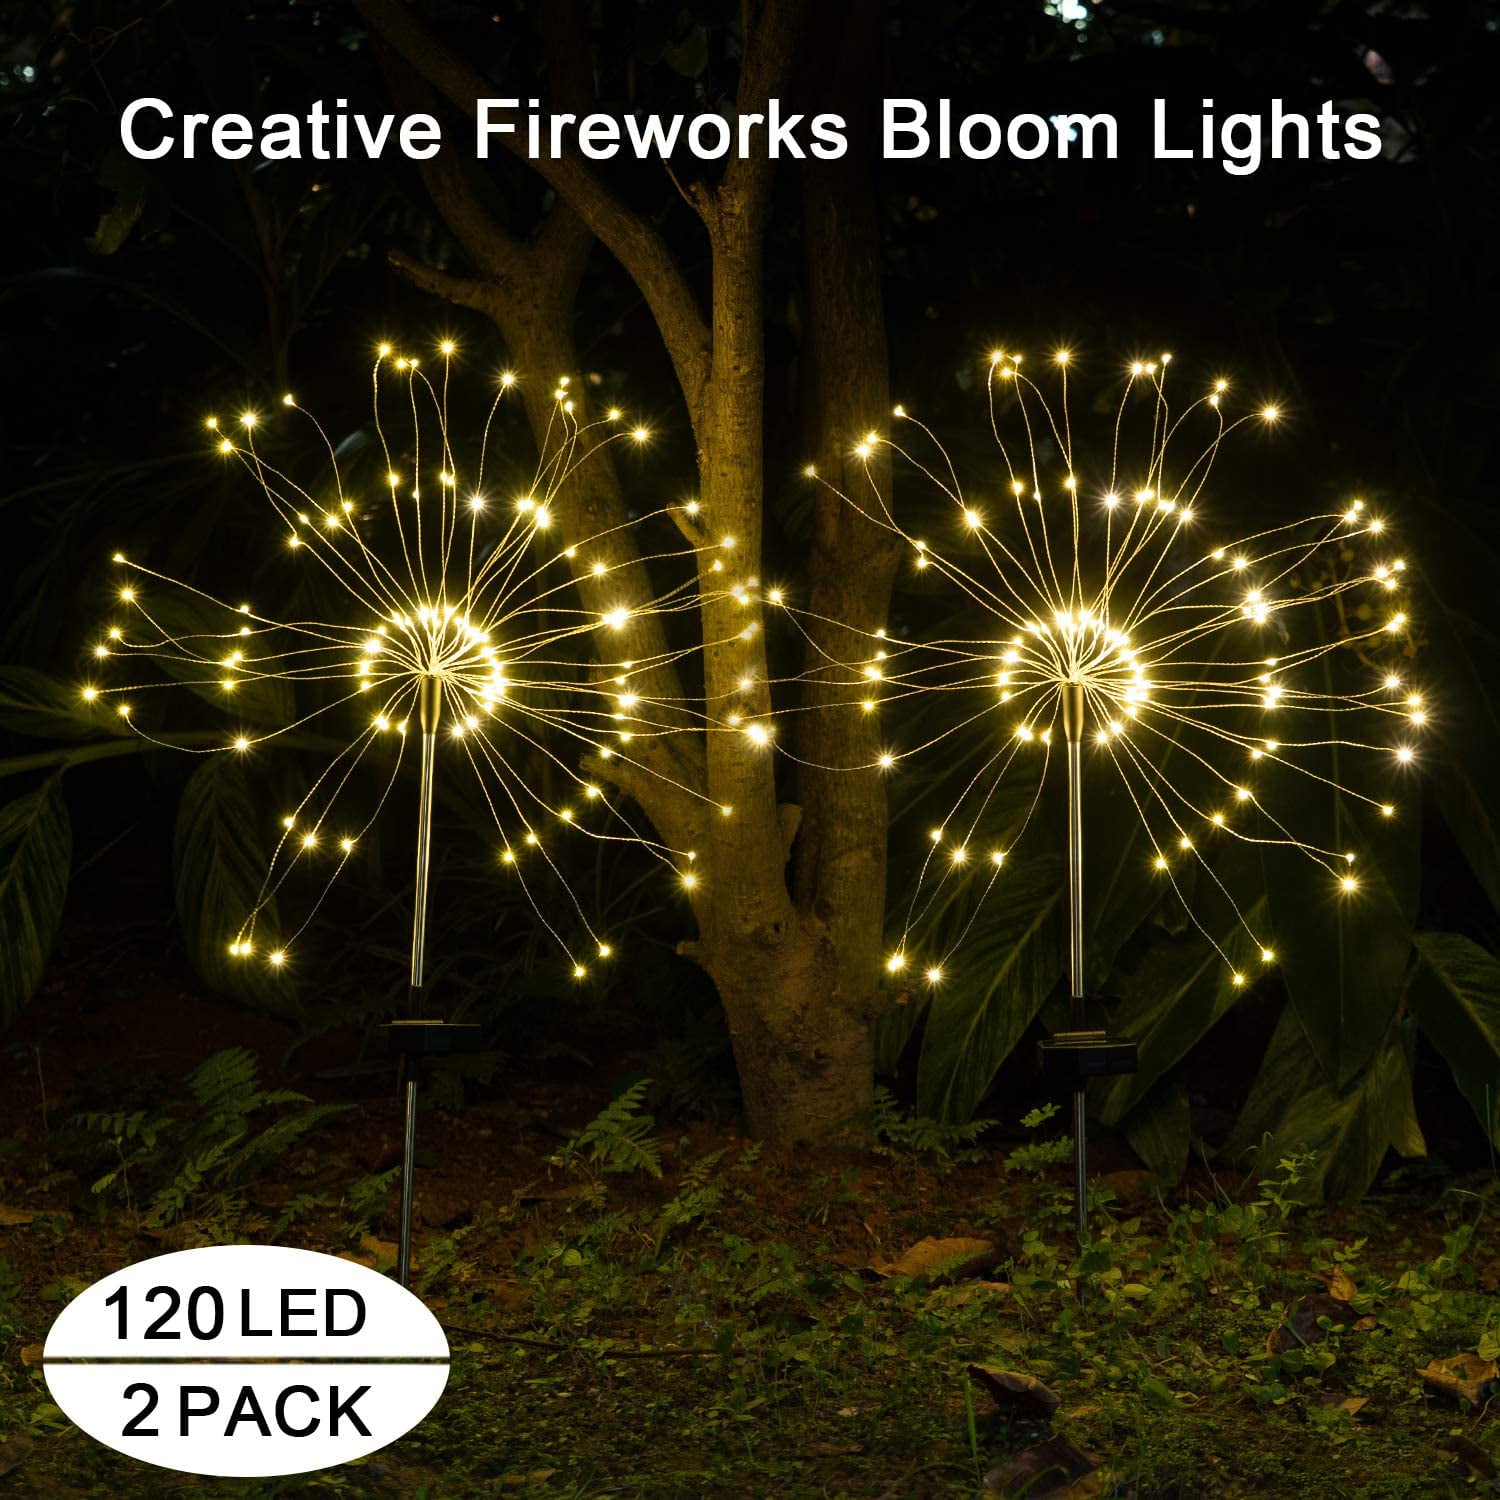 Multi-Color Outdoor Solar Garden Decorative Lights-Mopha Solar 105LED Powered 35Copper Wires String Landscape Light-DIY Flowers Fireworks Trees for Walkway Patio Lawn Backyard,Christmas Party Decor 